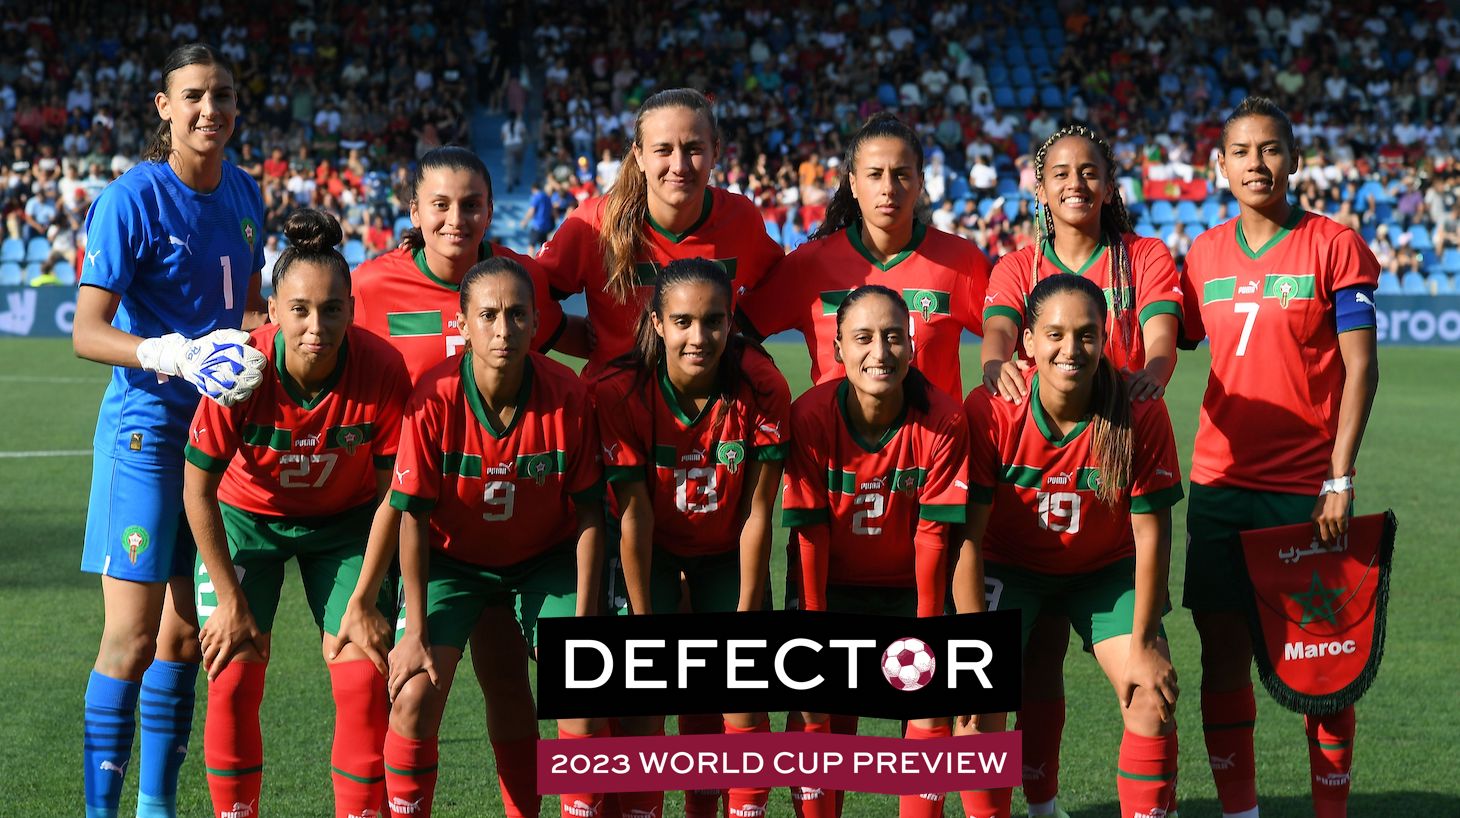 Morocco team line up during the Women´s International Friendly match between Italy and Morocco at Stadio Paolo Mazza on July 01, 2023 in Ferrara, Italy.